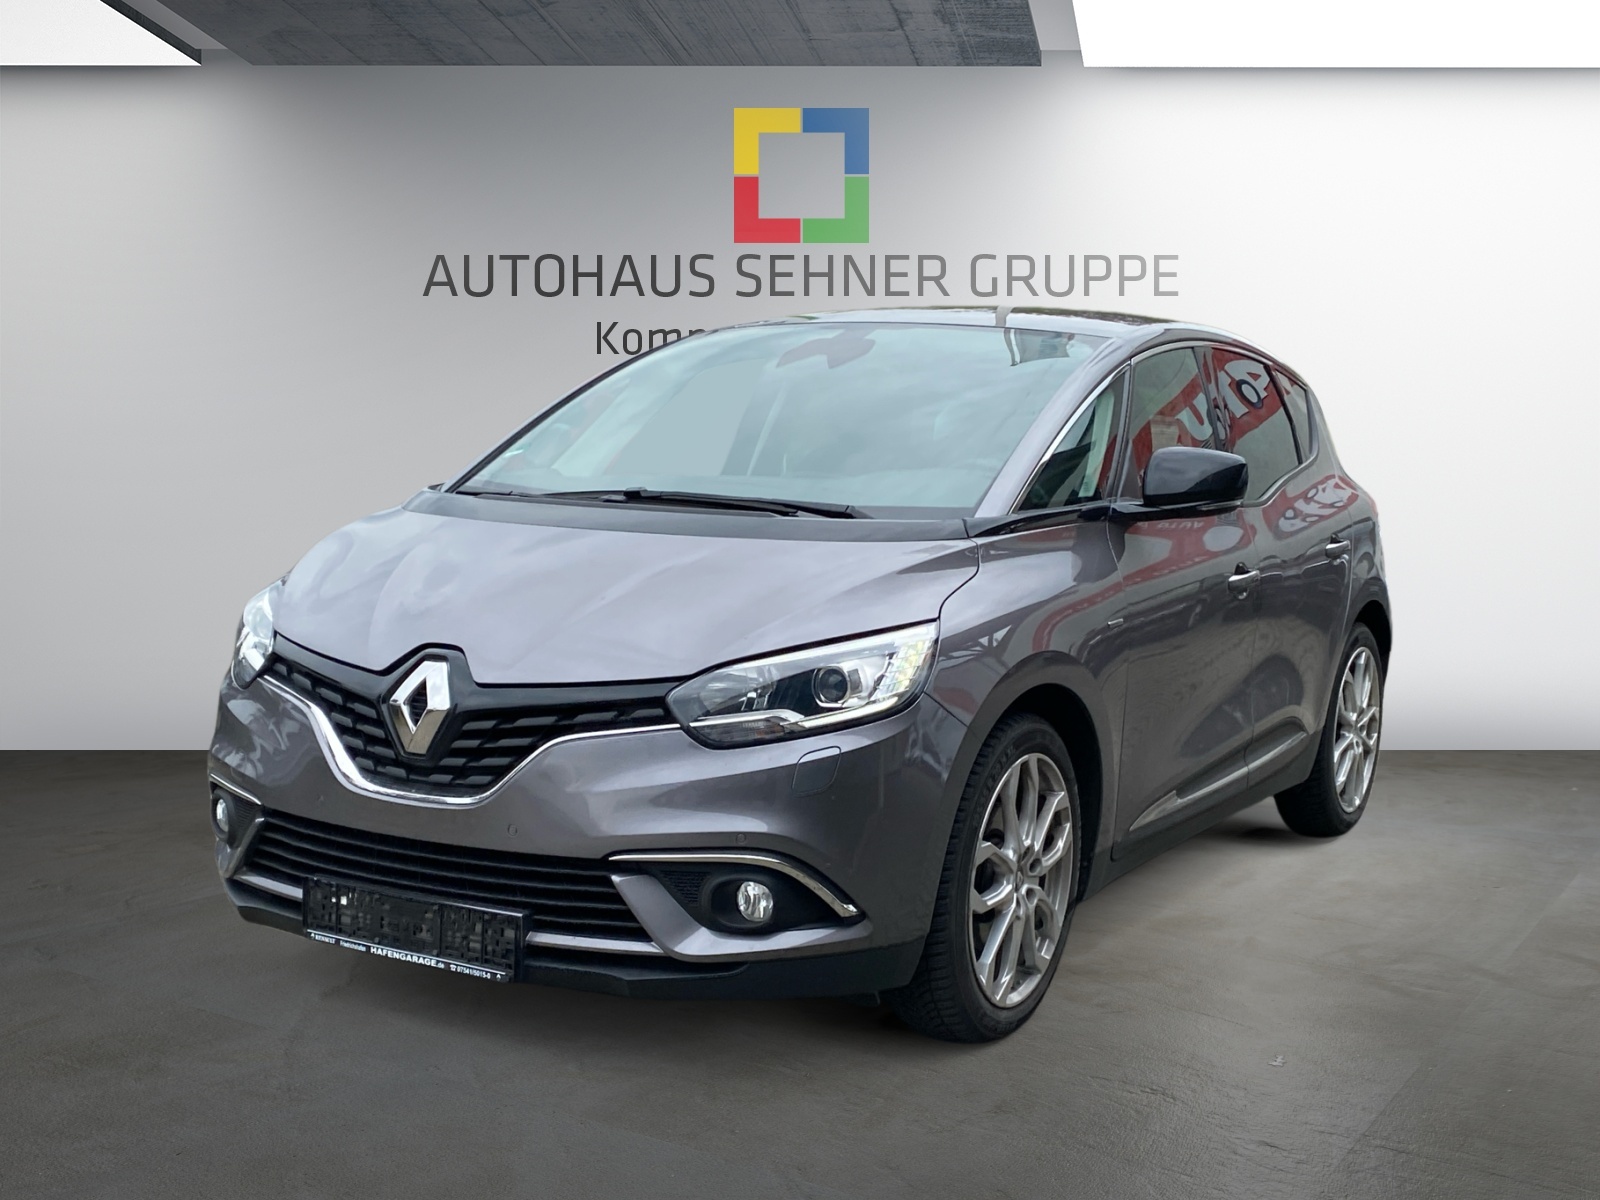 Renault Scenic LIMITED Deluxe TCe 140 GPF